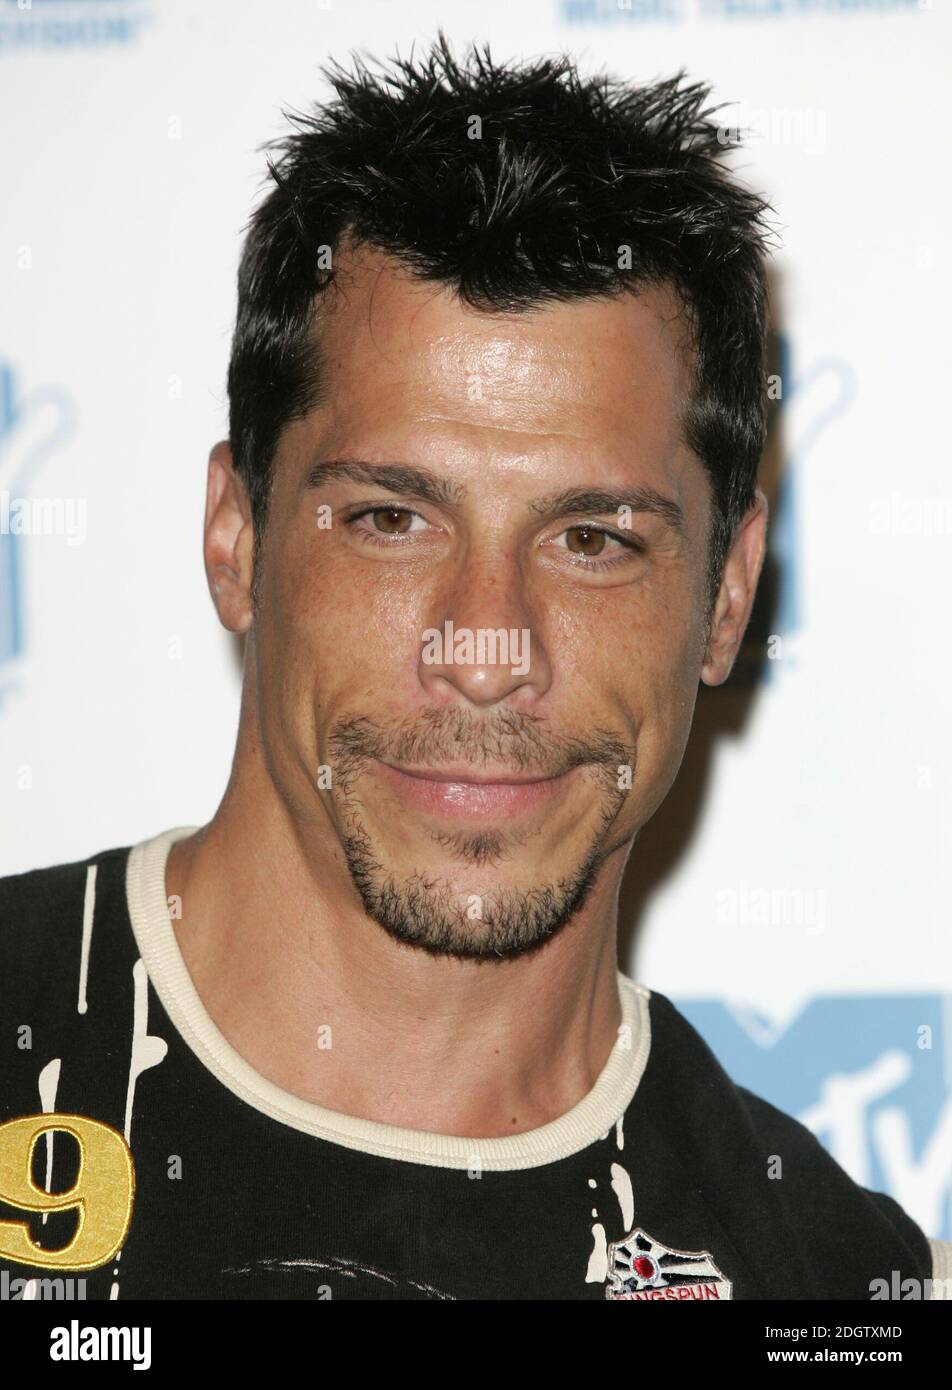 Danny Wood (New Kids On The Block) attending Stock Photo - Alamy